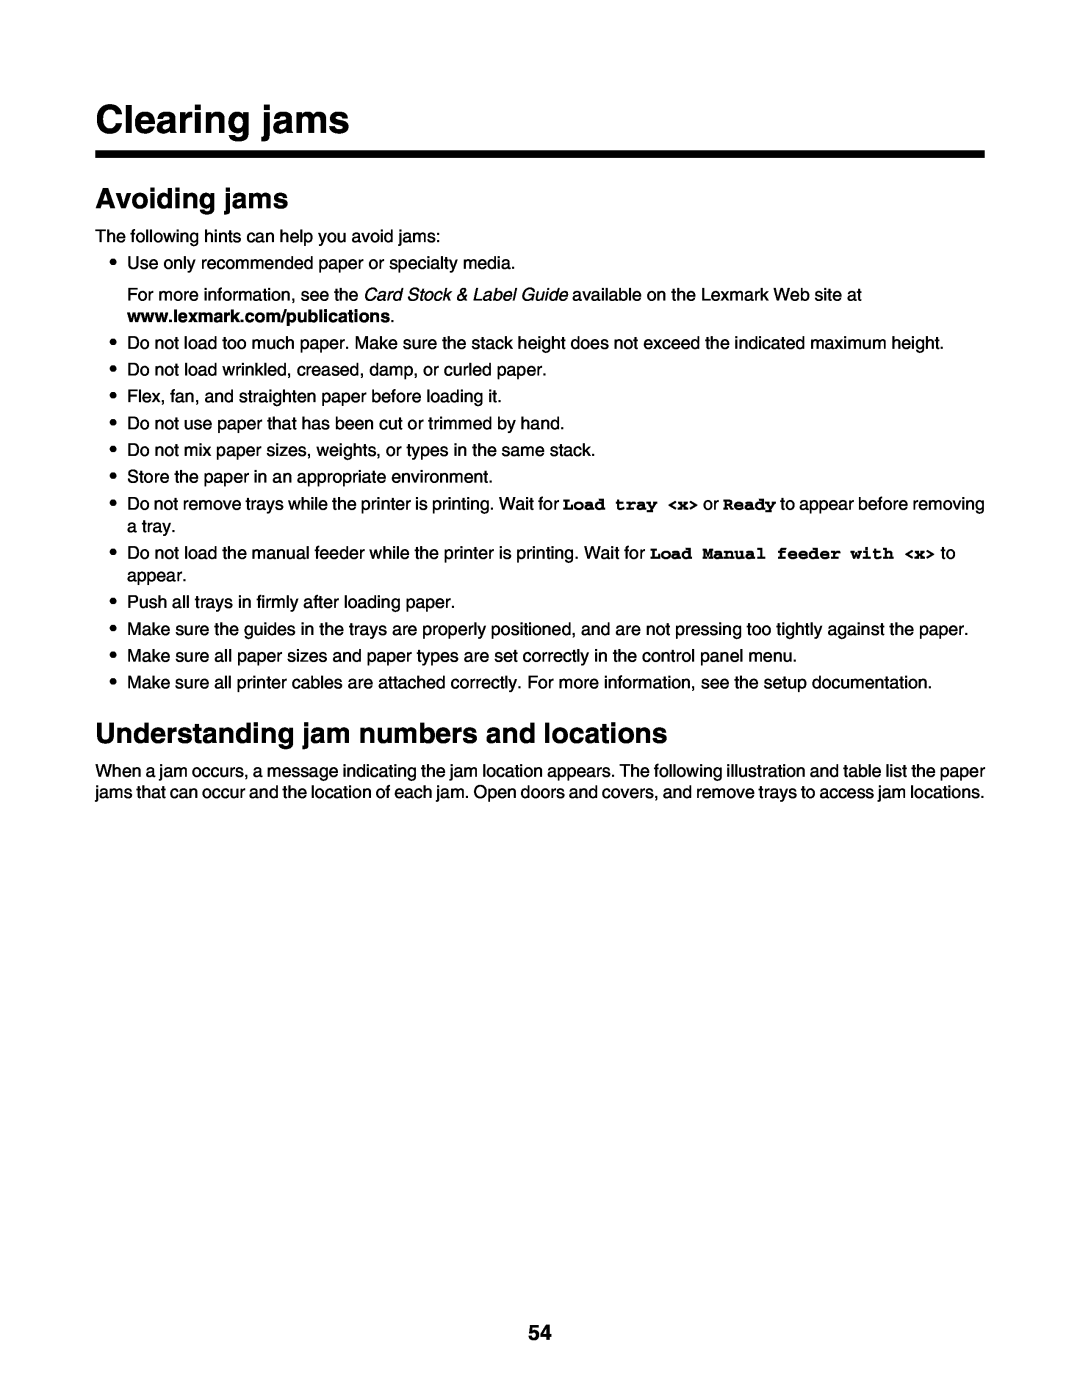 Lexmark C935 manual Clearing jams, Avoiding jams, Understanding jam numbers and locations 